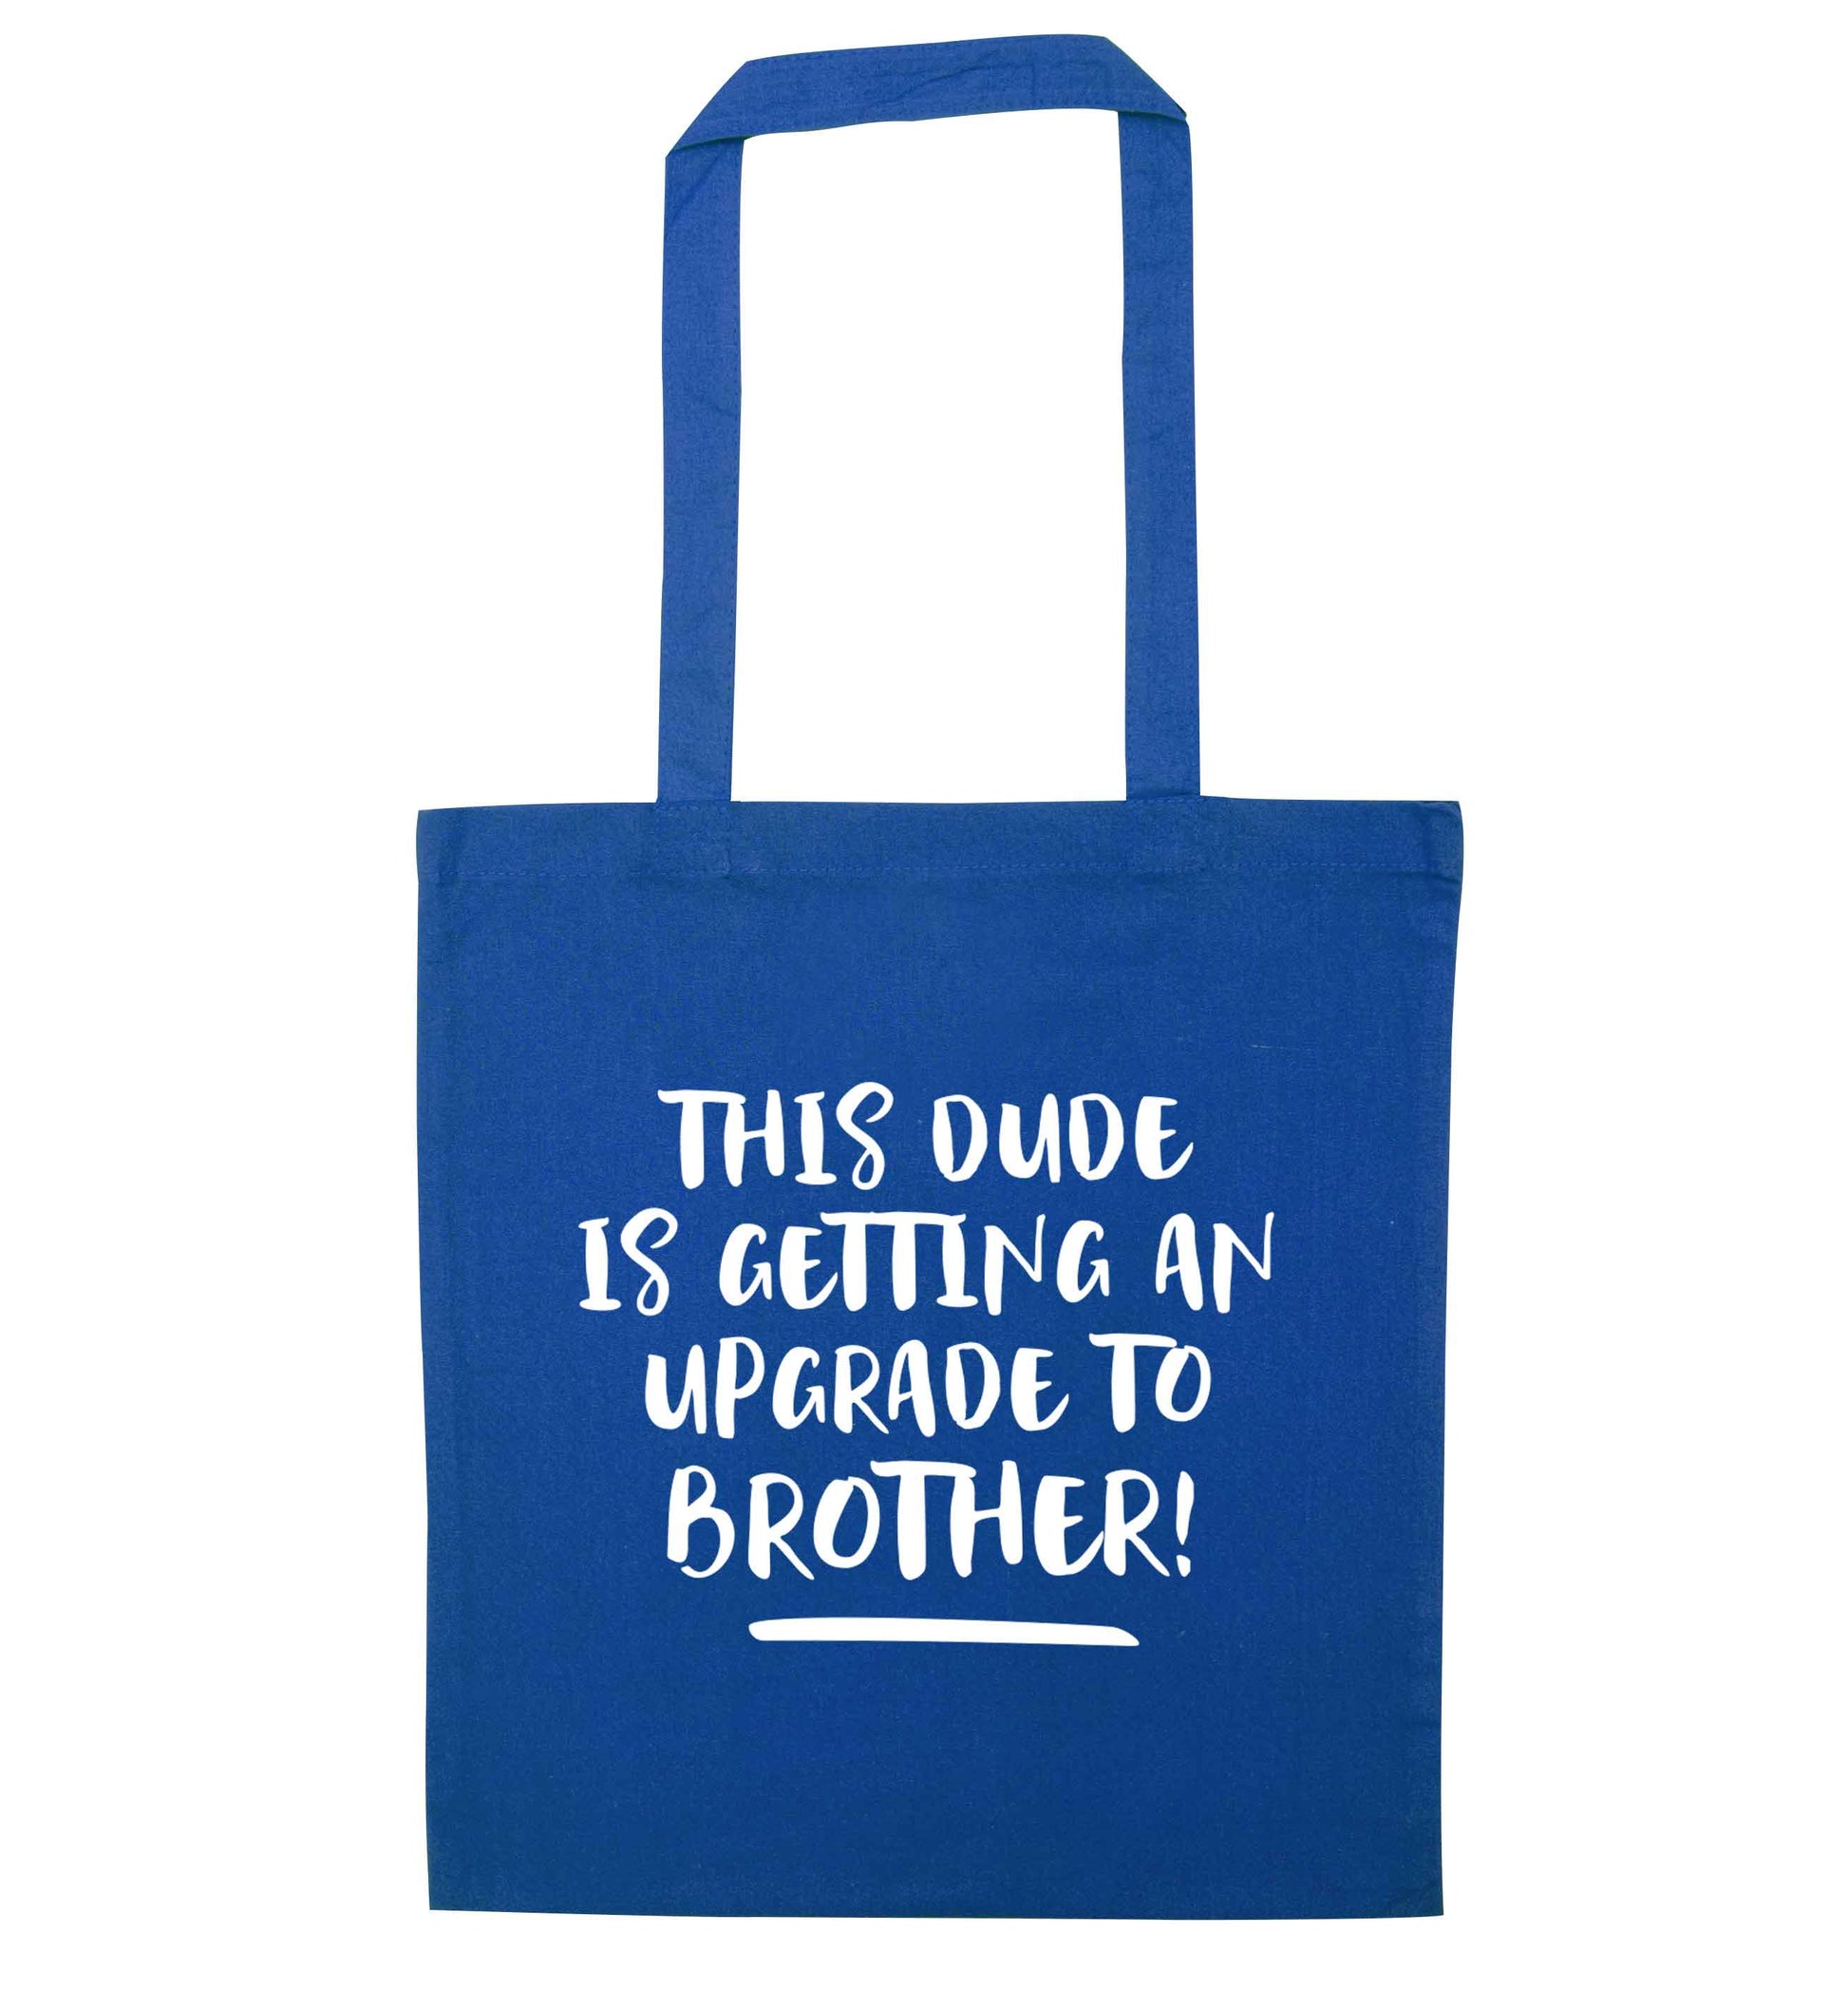 This dude is getting an upgrade to brother! blue tote bag